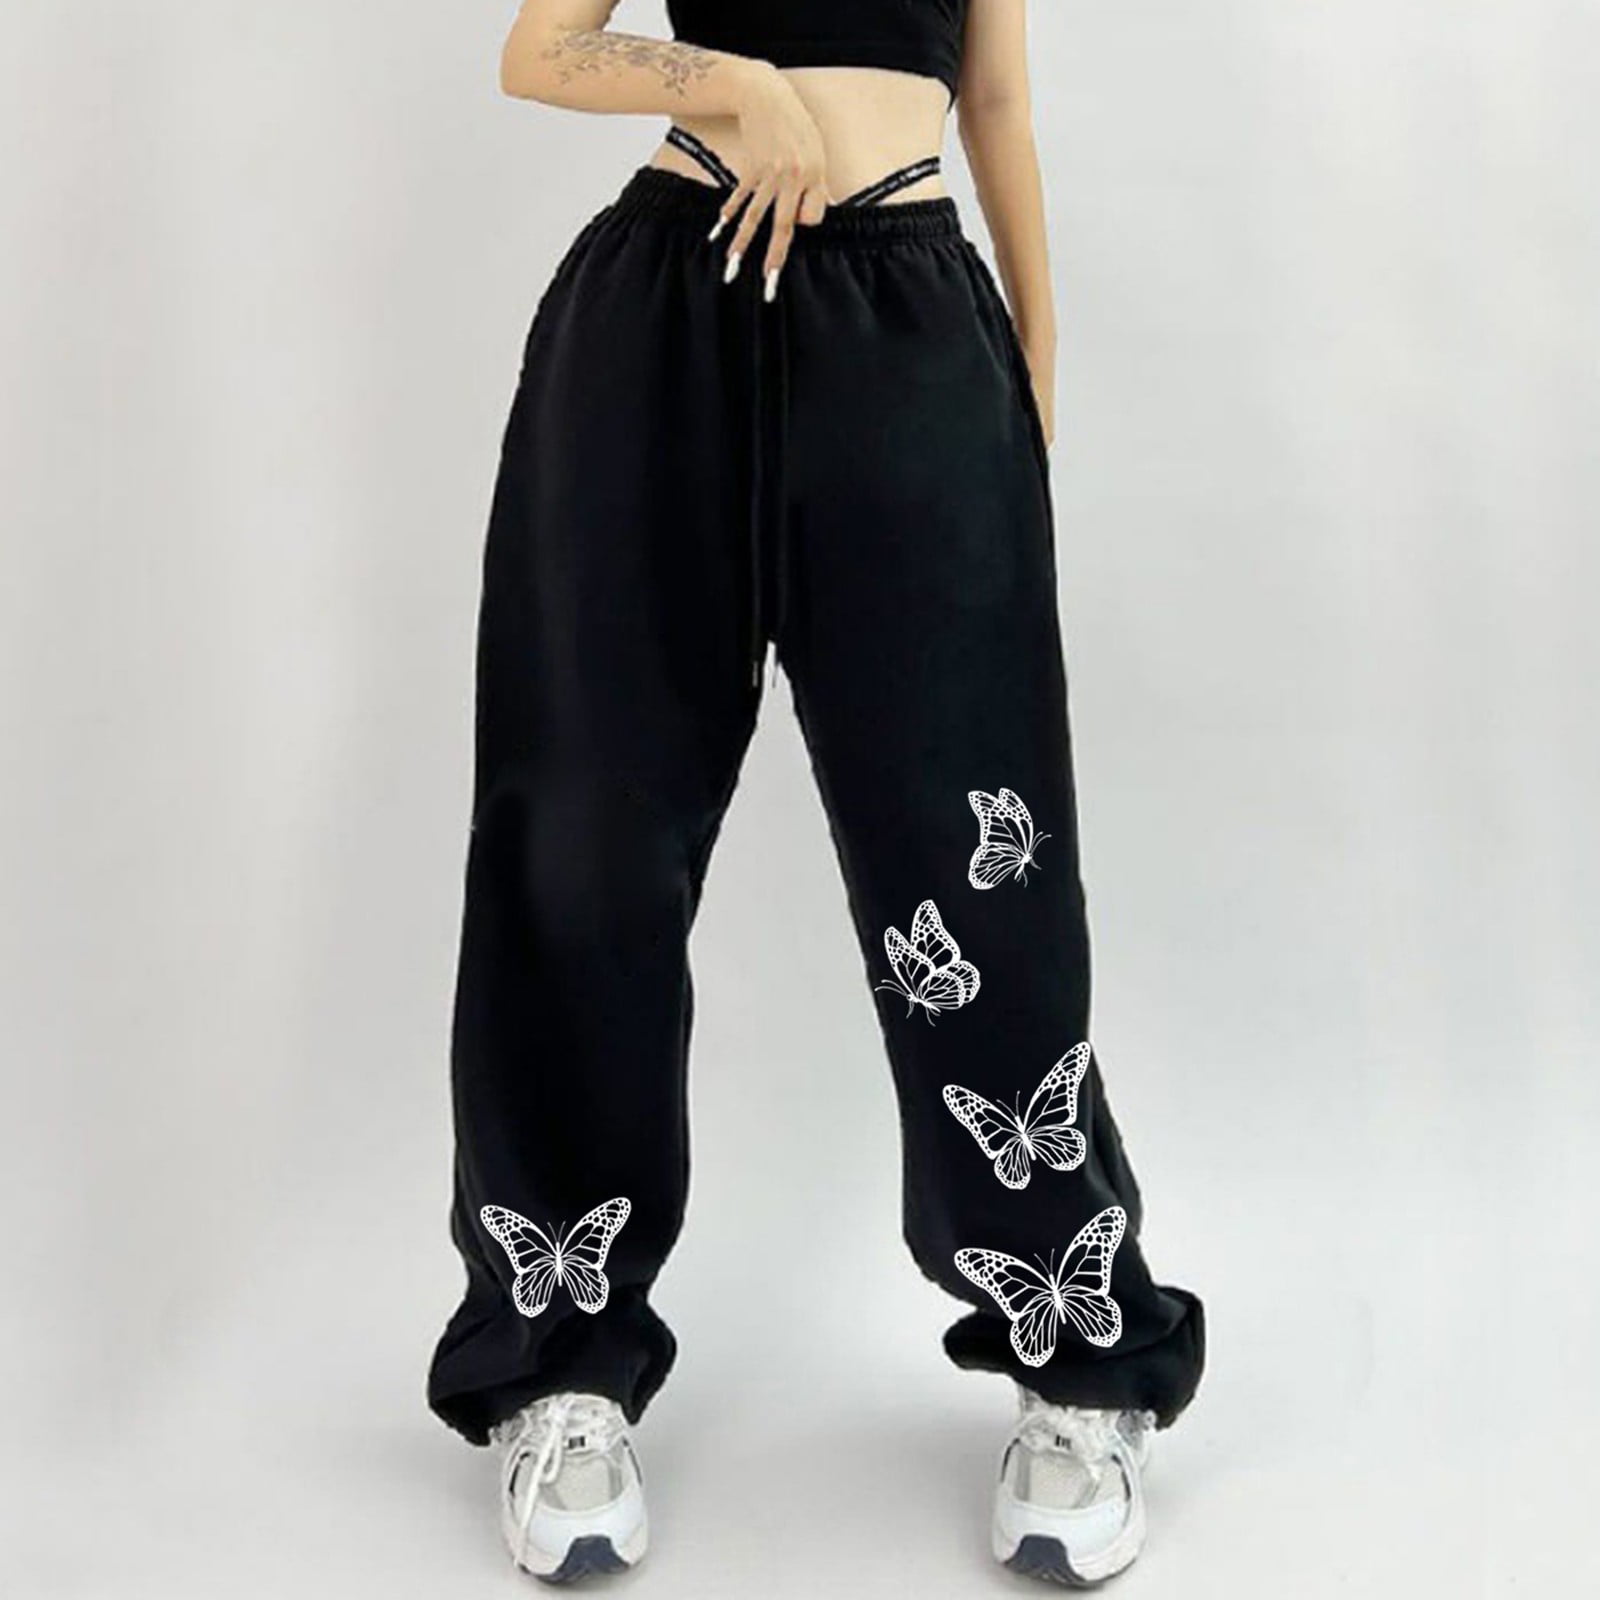 AWGE Oversized Taupe Needles Track Pants With Wide Leg And Butterfly Design  For Men And Women Sporty Best Sweatpants Style 231115 From Jinmei02, $30.84  | DHgate.Com